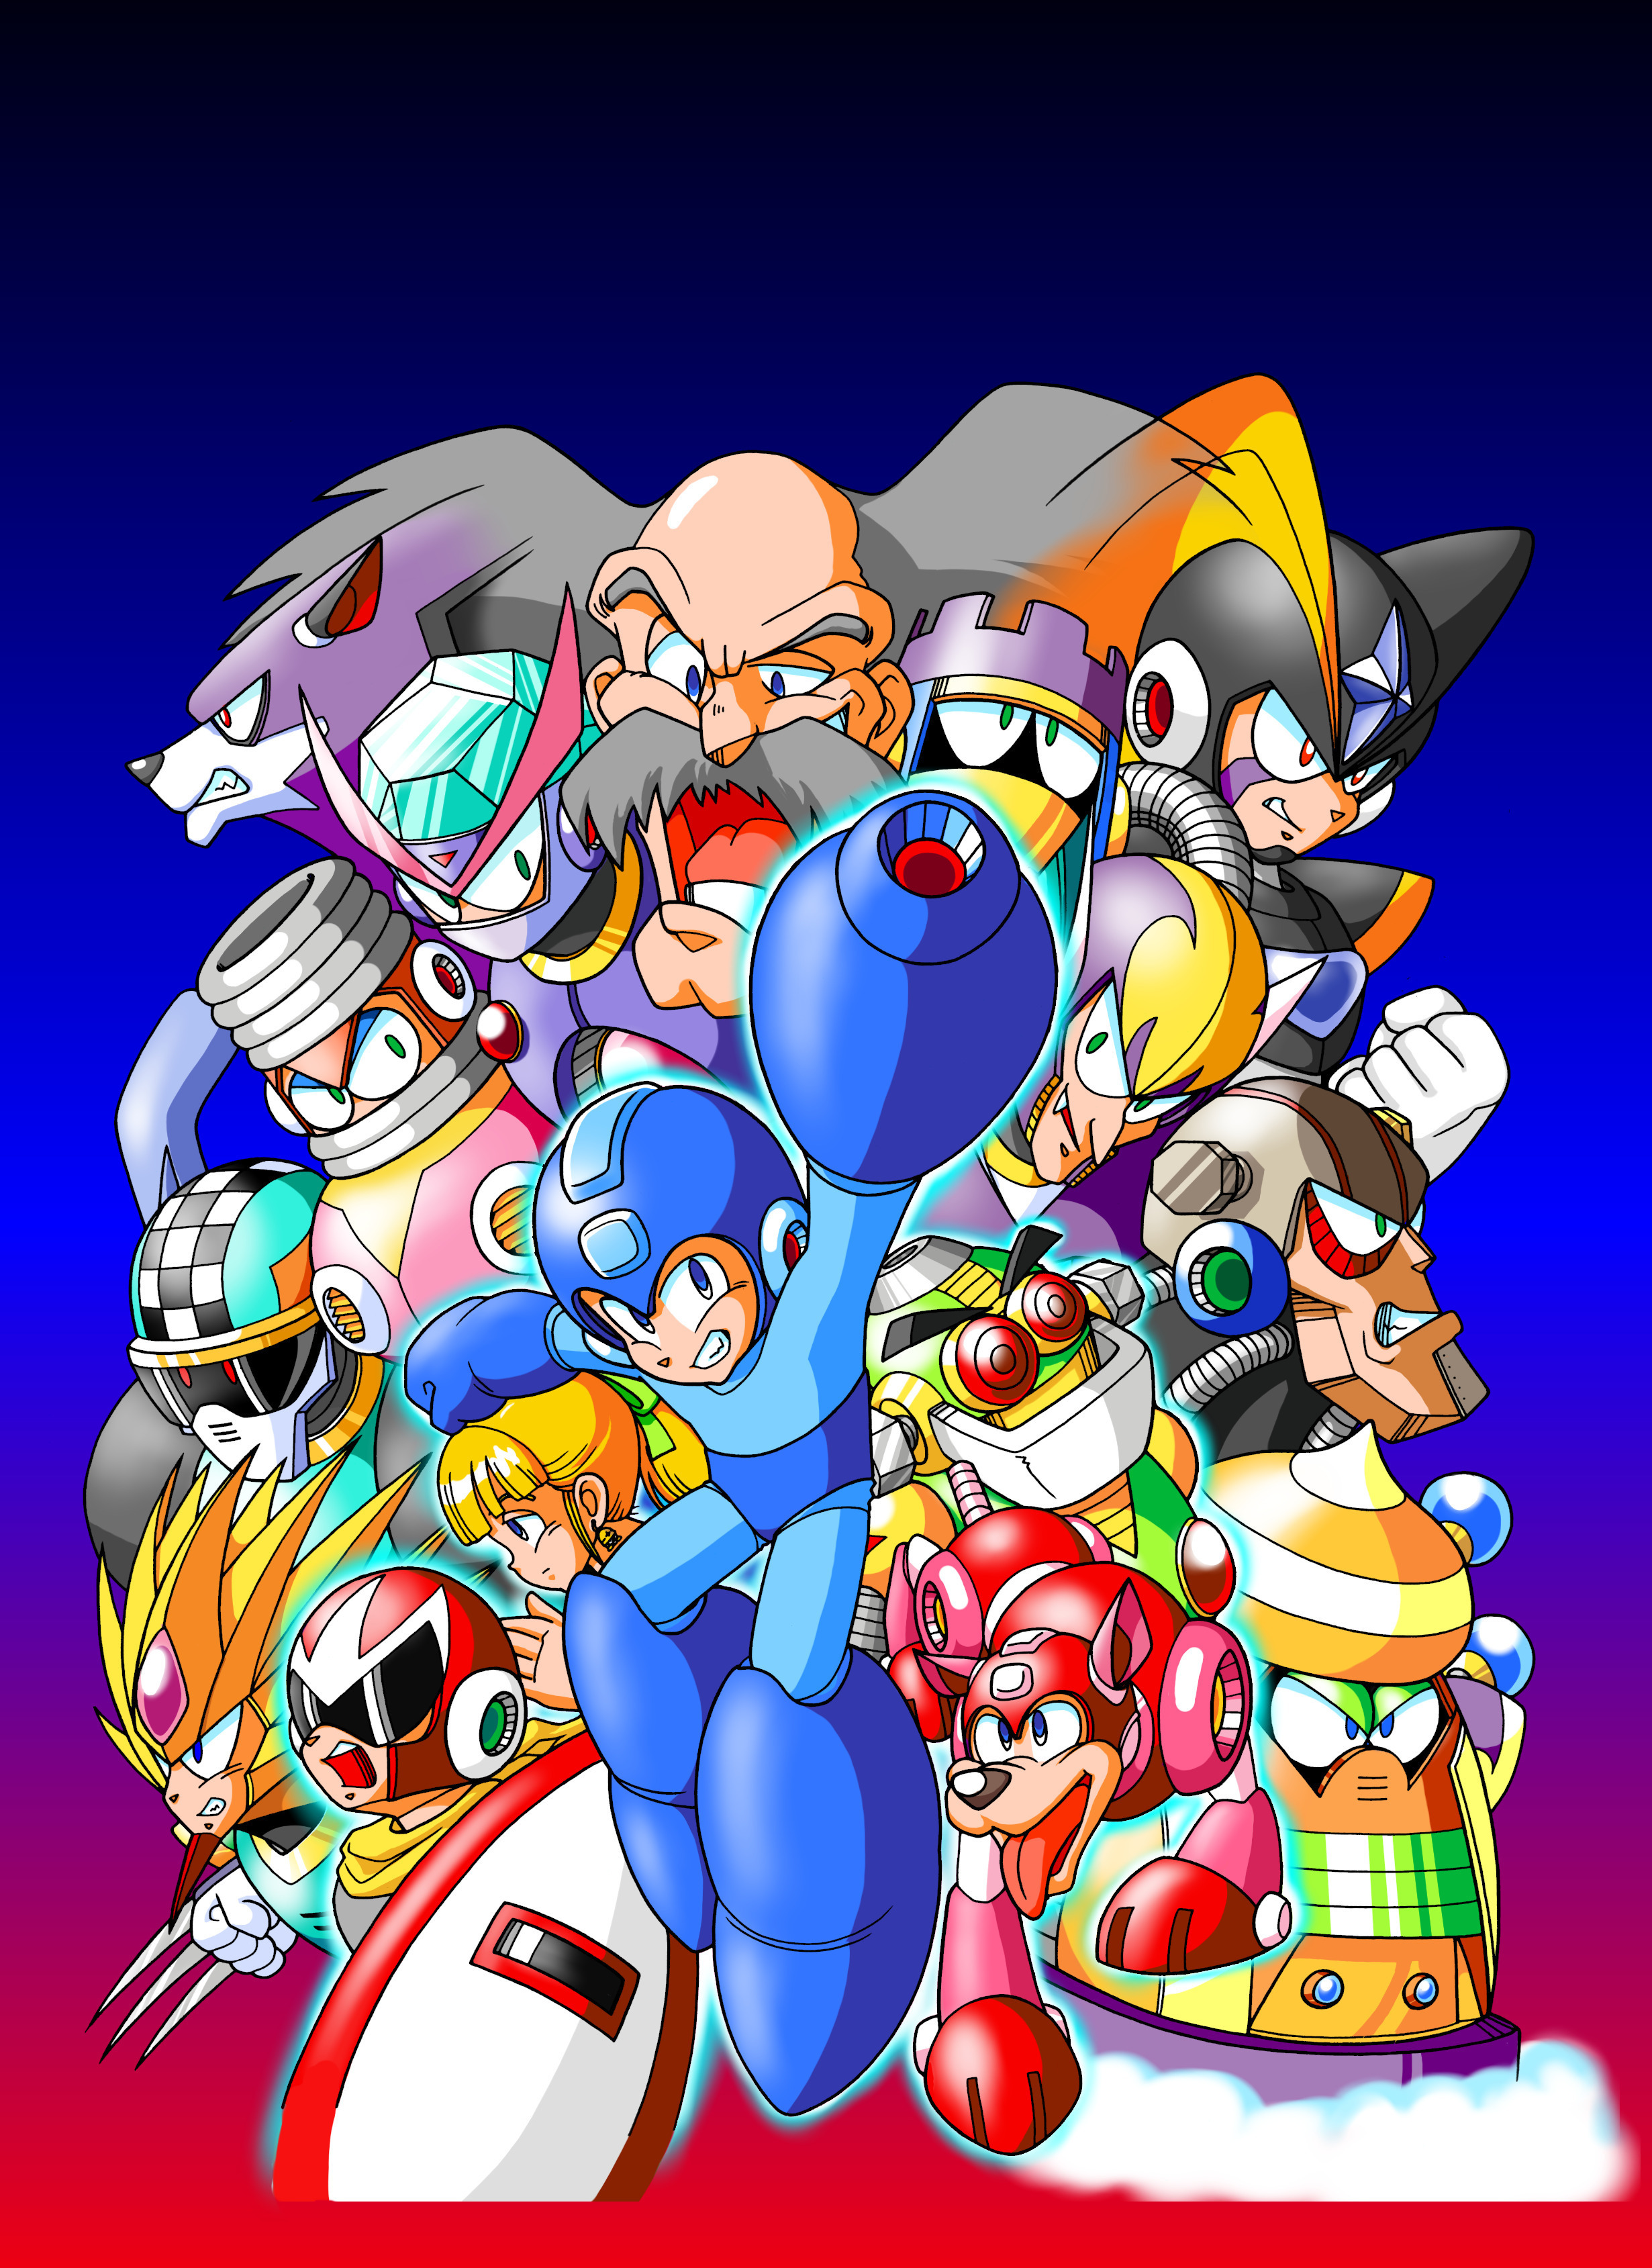 http://images2.wikia.nocookie.net/__cb20100509043210/megaman/images/a/a7/MM7-Promo-Art.jpg